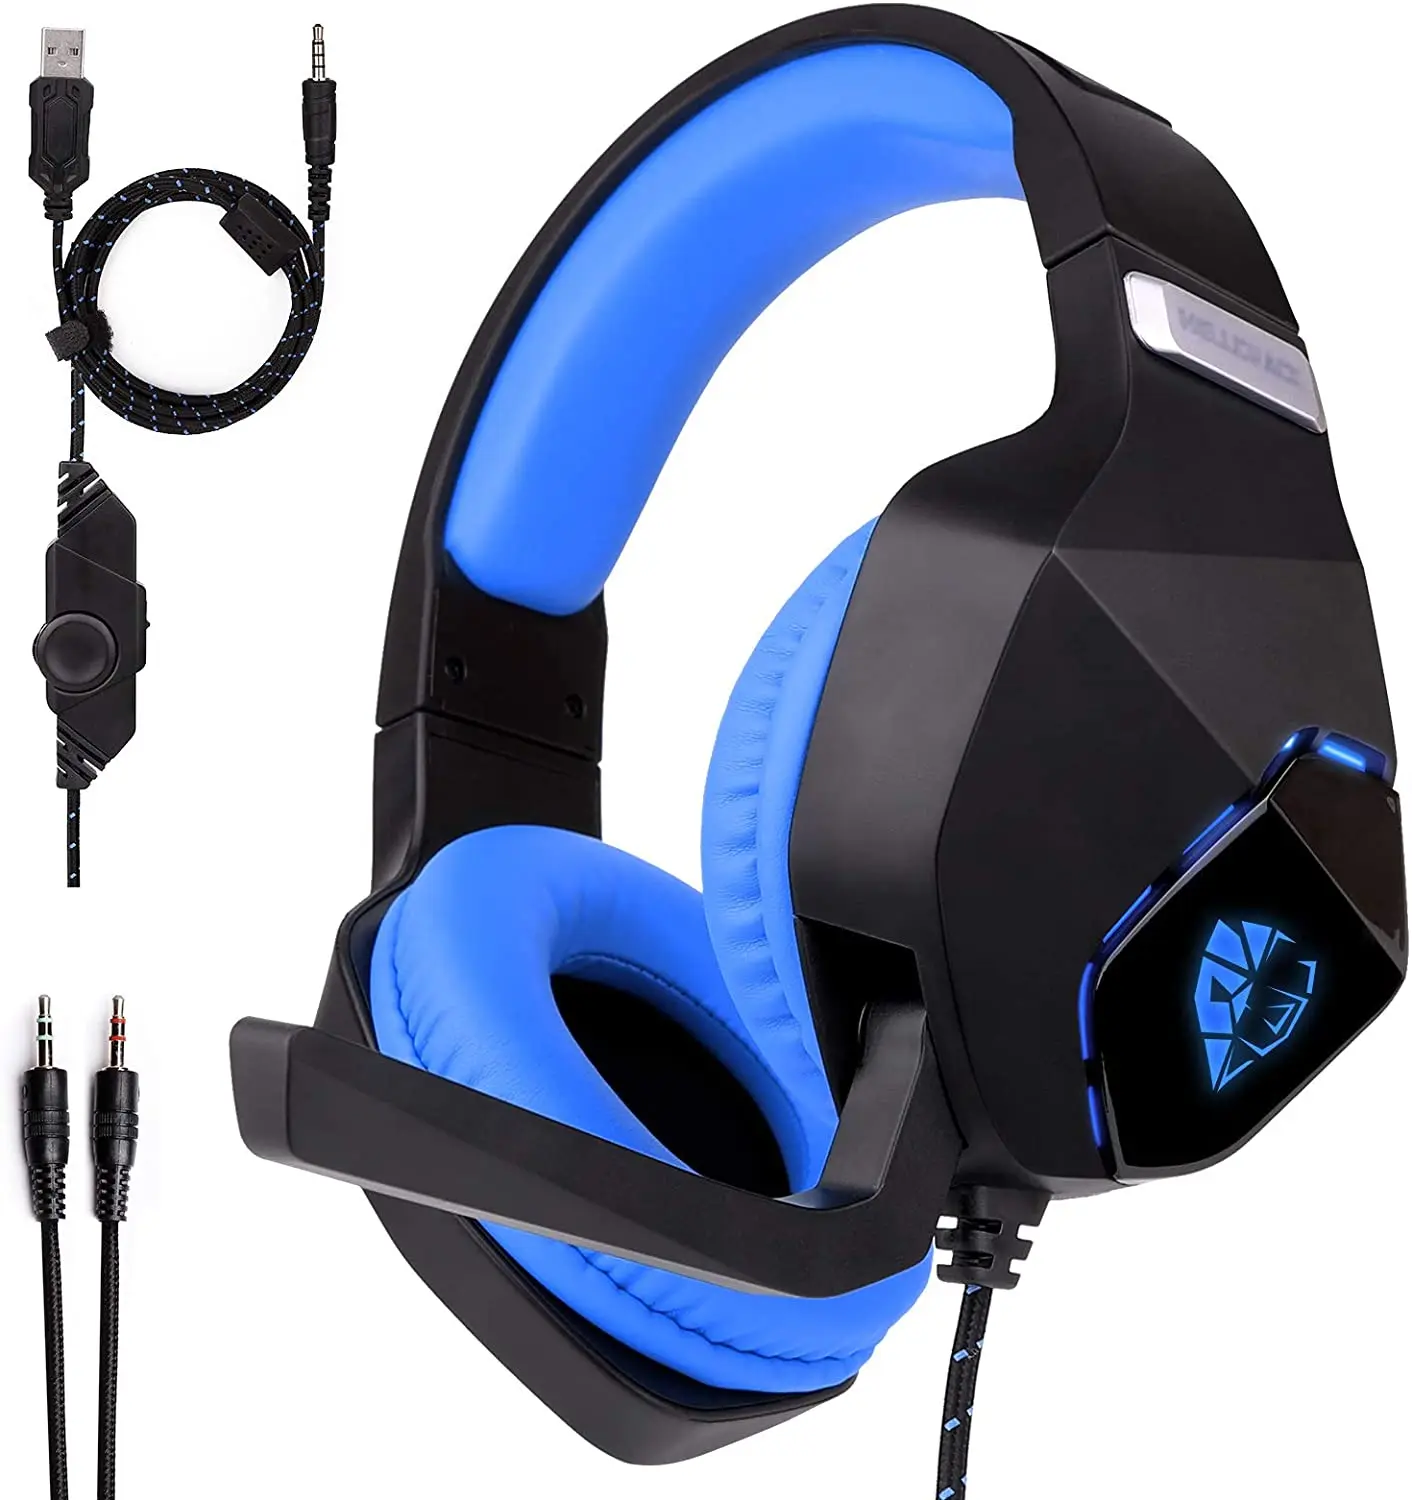 Hellcrack G600 Newest Gaming Headset For Ps4 One Wired Headphone Earphones For Ps4 Ps5 Wholesale With Mic Free Sample Buy Wired Stylish Gaming Headset Gaming Headset Ps4 Gaming Headset Custom Logo Product On